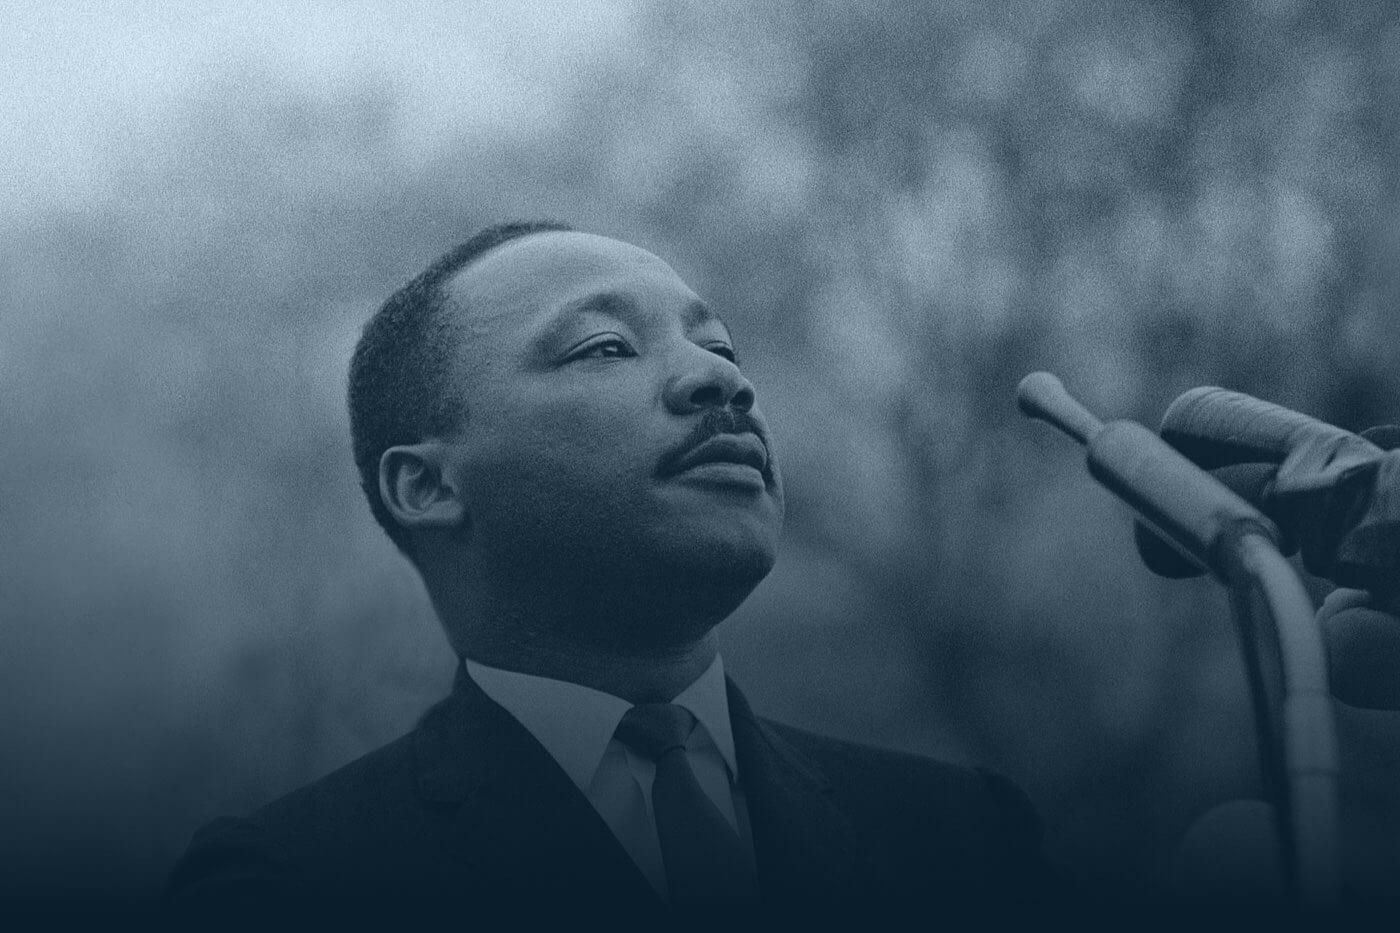 Martin Luther King Jr. Day 2020 wallpaper